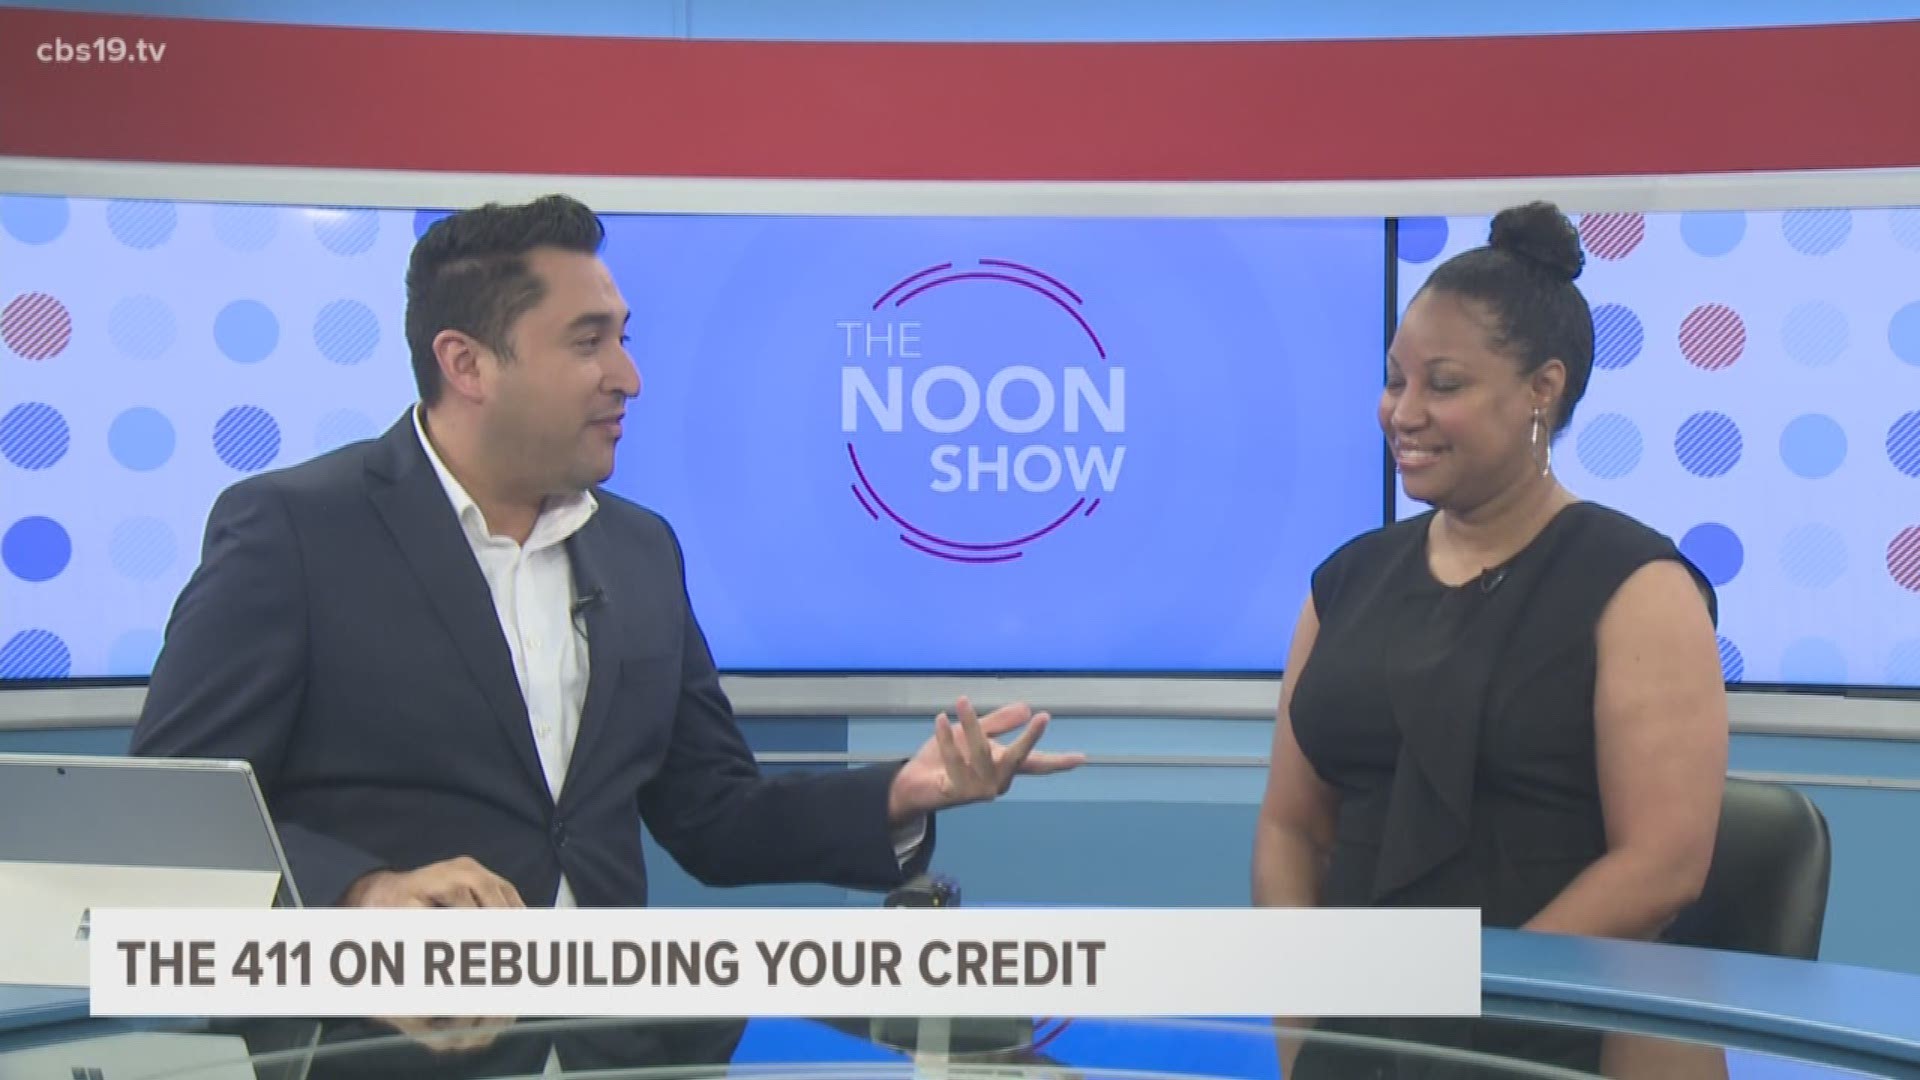 LaRon Chadwick joins CBS19 on The Noon Show to  provide tips on how to rebuild your credit.